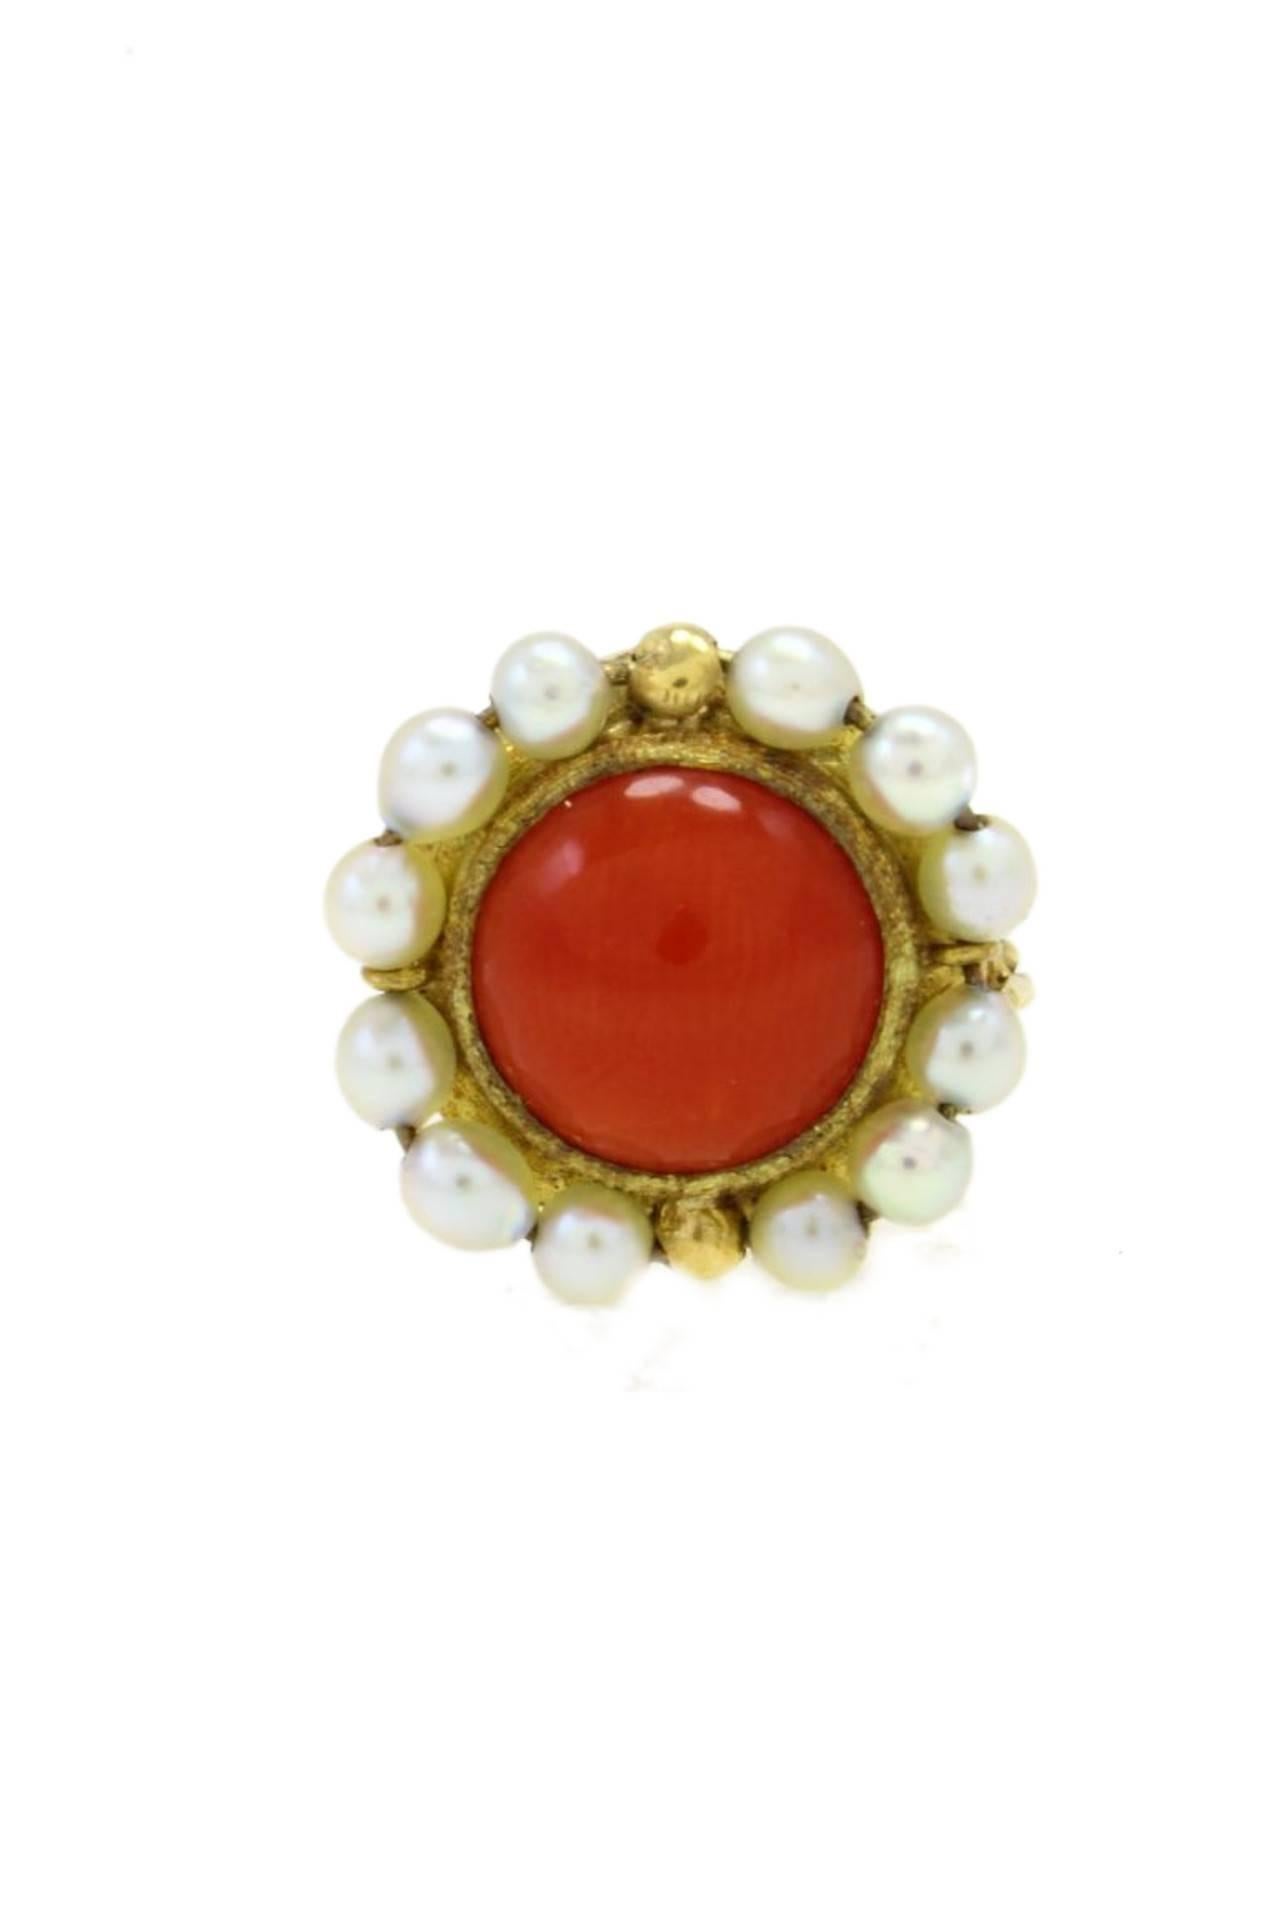 A graceful button of coral is mounted in the center of these classic earrings. The coral is surrounding of little pearls, and all is mounted in 18Kt yellow gold.
Pearl 1.20gr
Coral 2.10gr
Tot weigth 9.1 gr

R.f. ghie